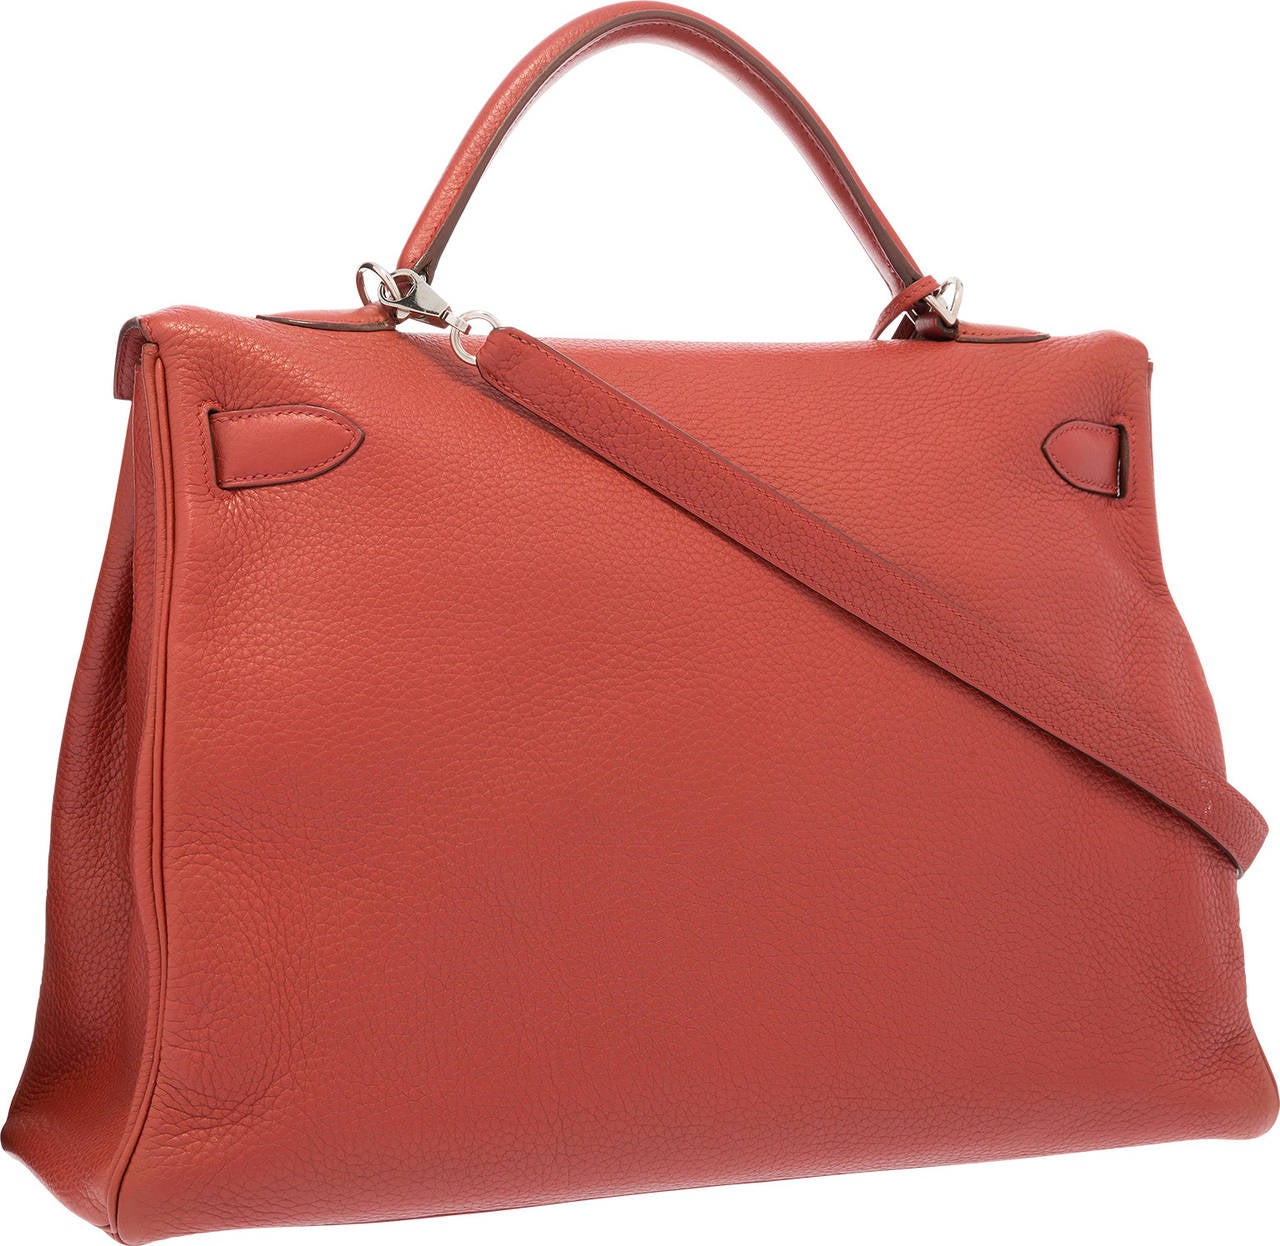 Hermes 40cm Rouge Venetian Clemence Retourne Kelly Bag with Palladium Hardware In Good Condition For Sale In New York, NY